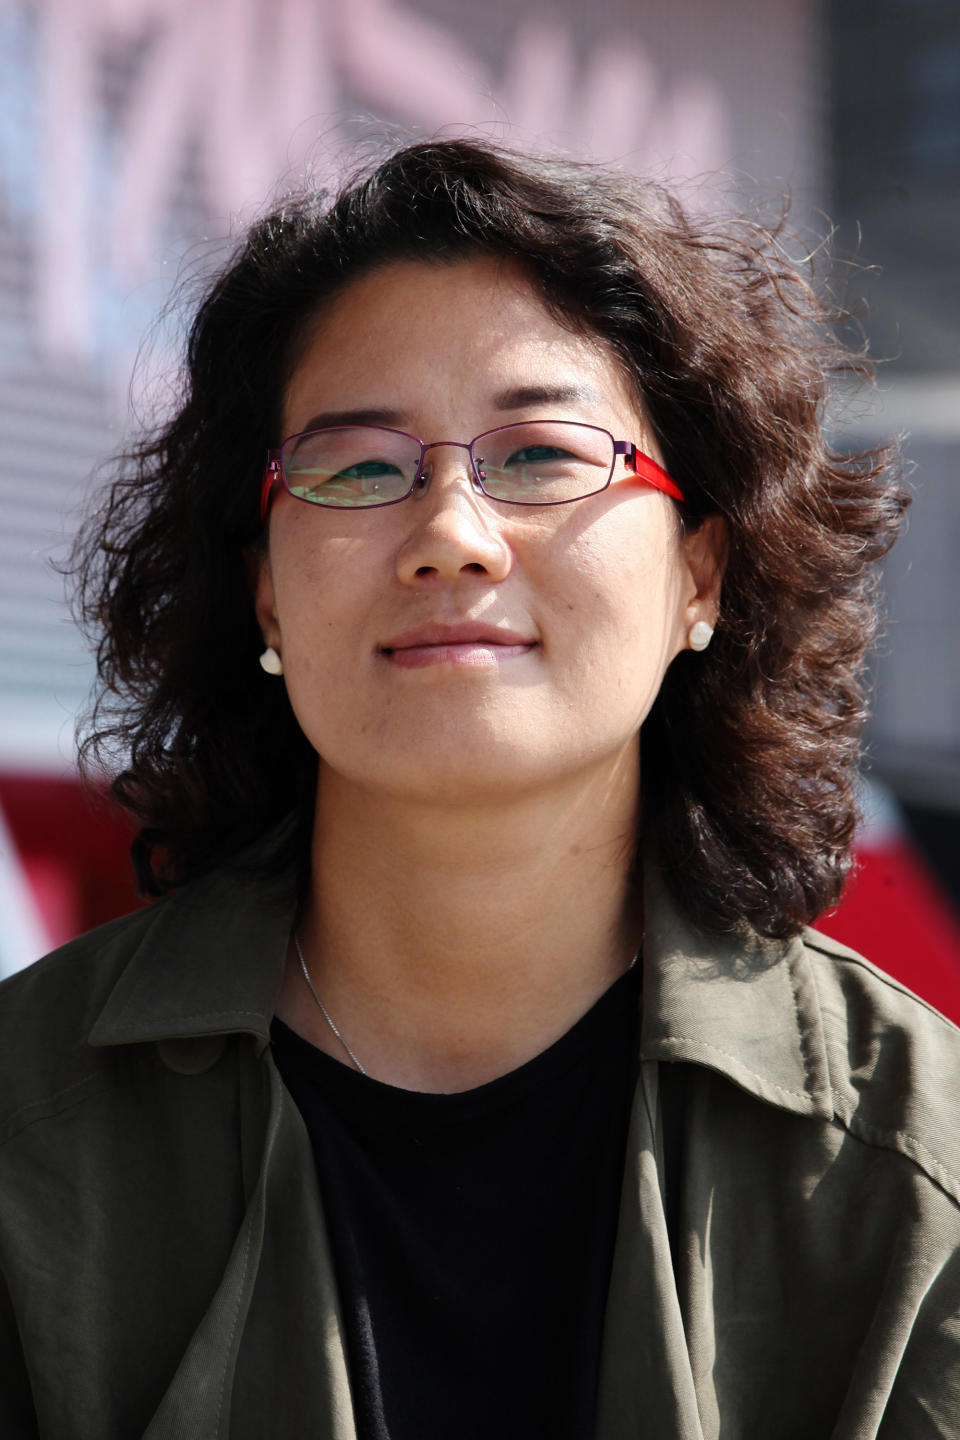 In this Oct. 4, 2013 photo, South Korean Director Kim Lyang poses during an interview with the Associated Press at Busan Cinema Center in Busan, South Korea. The 41-year-old Kim struggled to reconcile her father’s origin growing up during a time of widespread fear of another communist invasion and North Korean spies. “It did not feel natural for me to say my father’s hometown was North Korea,” Kim said during the interview. (AP Photo/Woohae Cho)